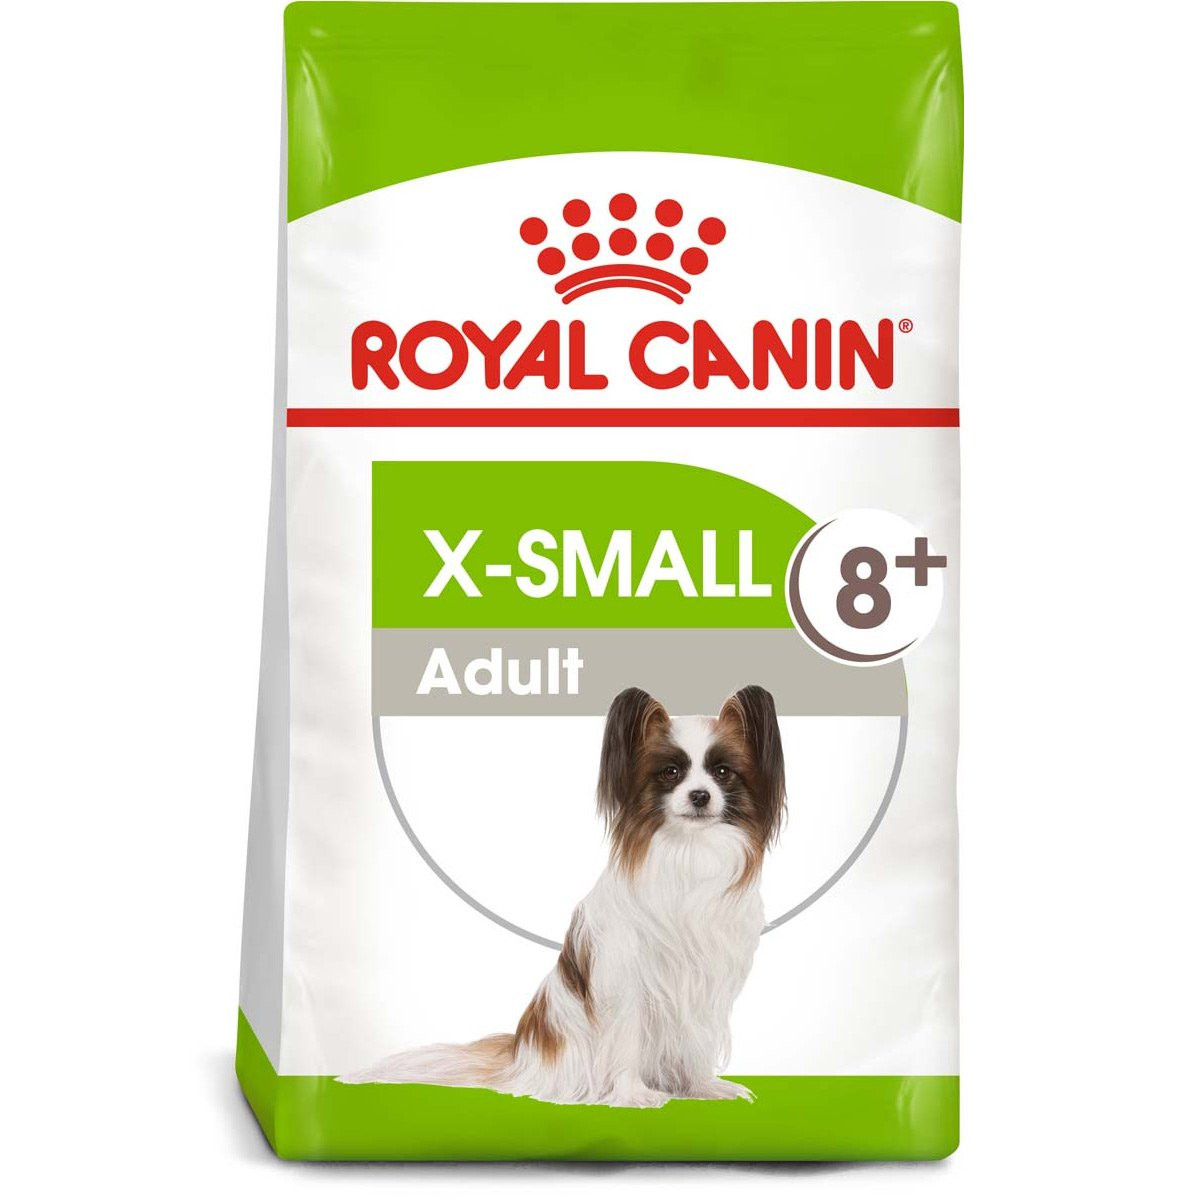 ROYAL CANIN X-SMALL Adult 8+ 8+3kg